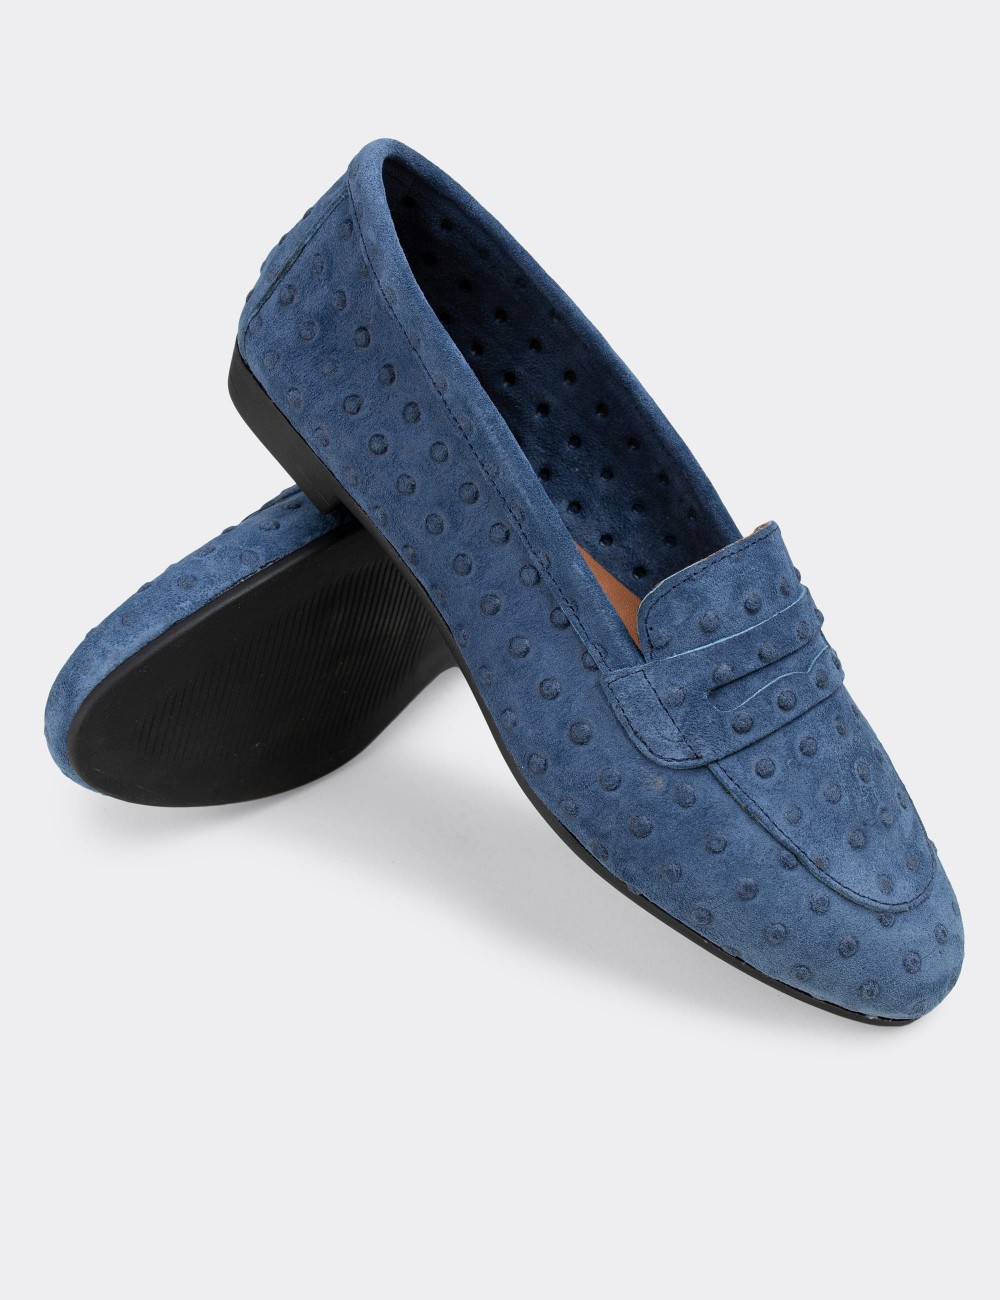 Blue Suede Leather Loafers  - E3202ZMVIC05